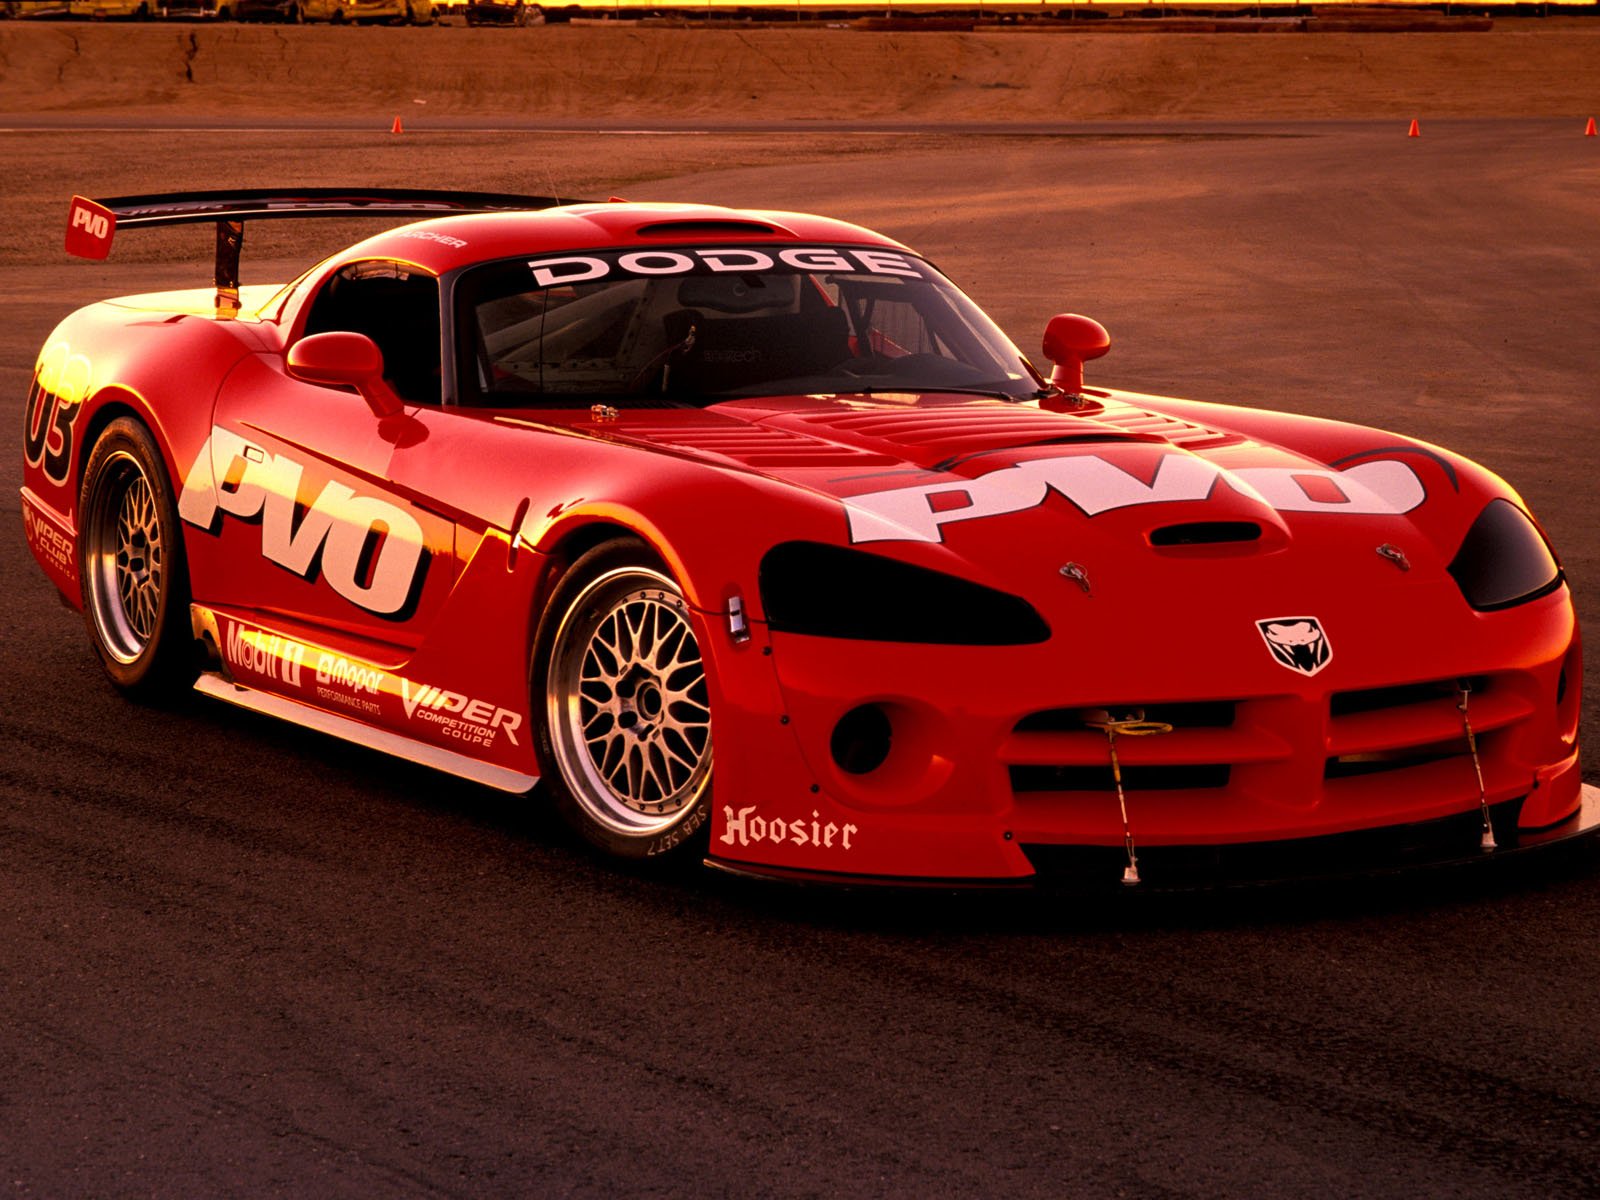 2003, Dodge, Viper, Competition, Coupe, Supercar, Supercars, Muscle Wallpaper